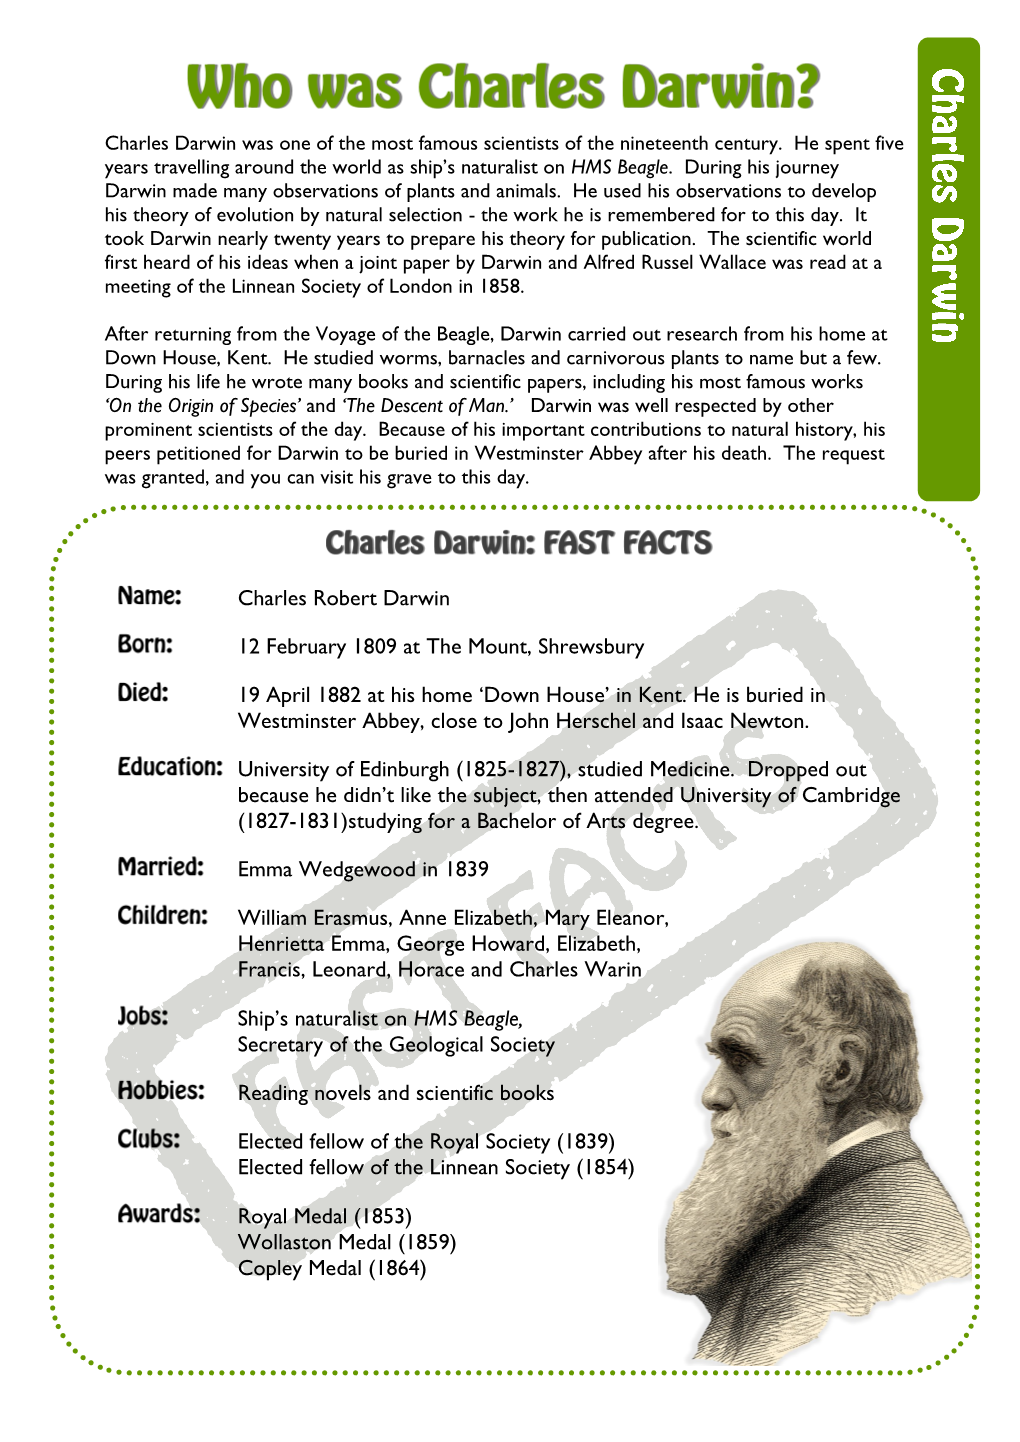 Charles Darwin Was One of the Most Famous Scientists of the Nineteenth Century